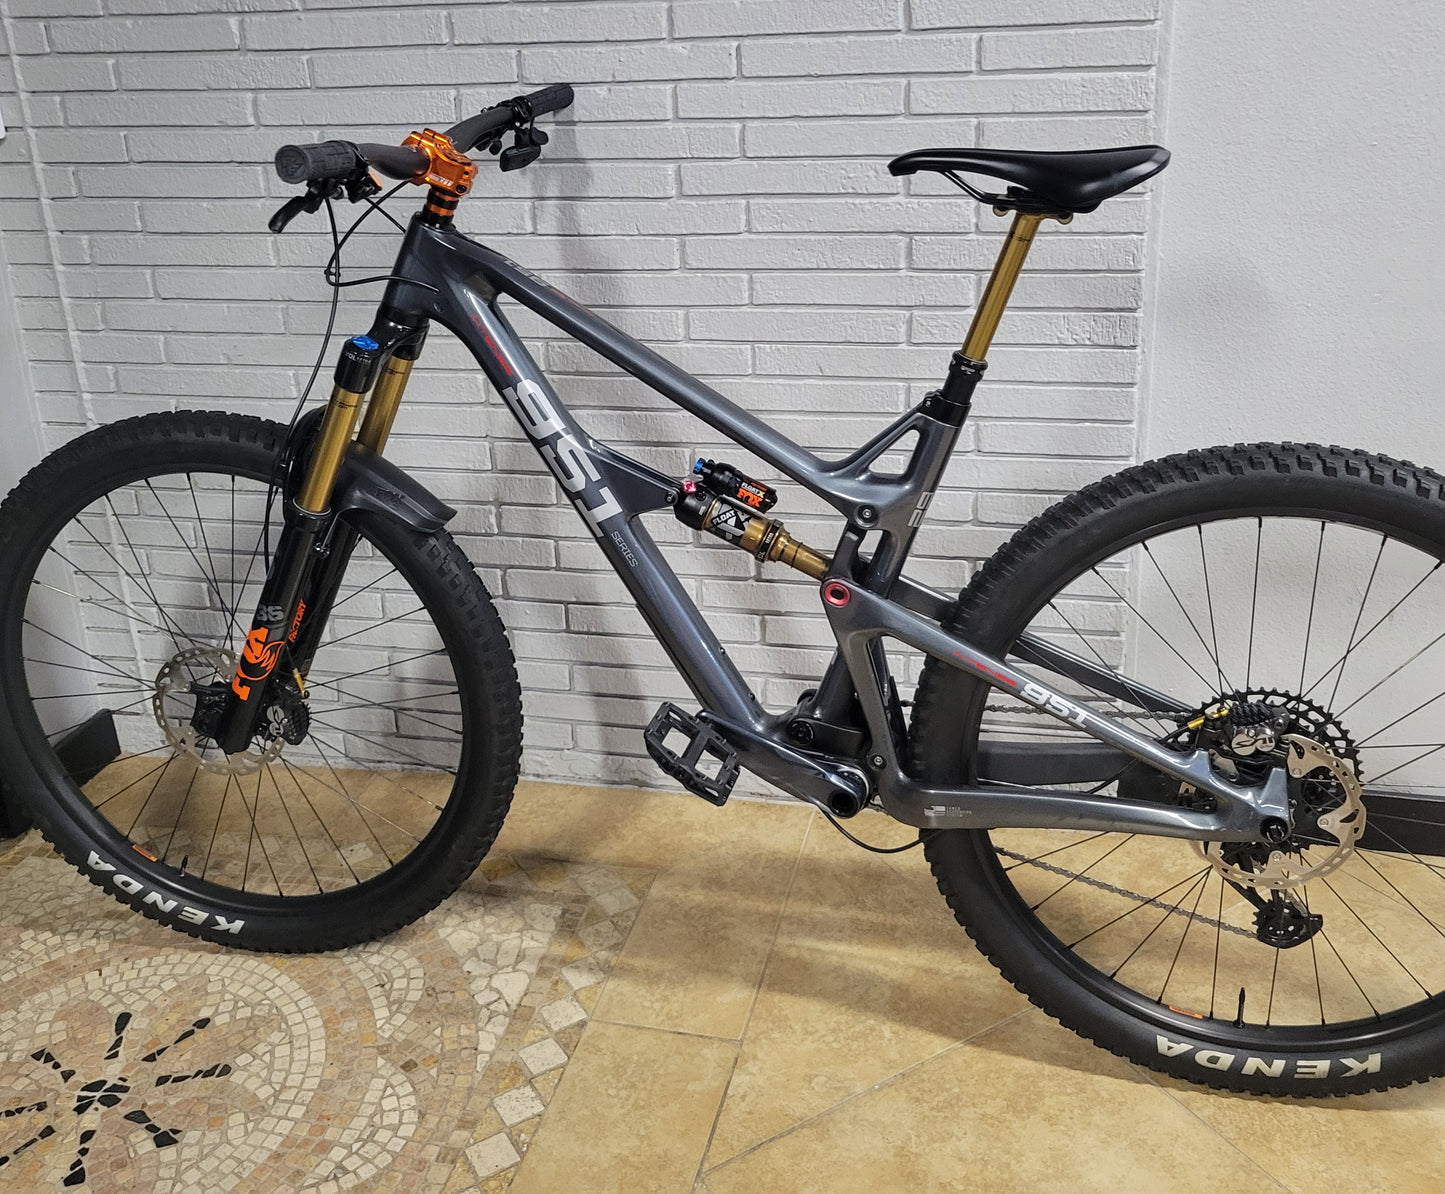 2022 Intense 951 Trail (Large) Upgraded- Fox Factory, AXS